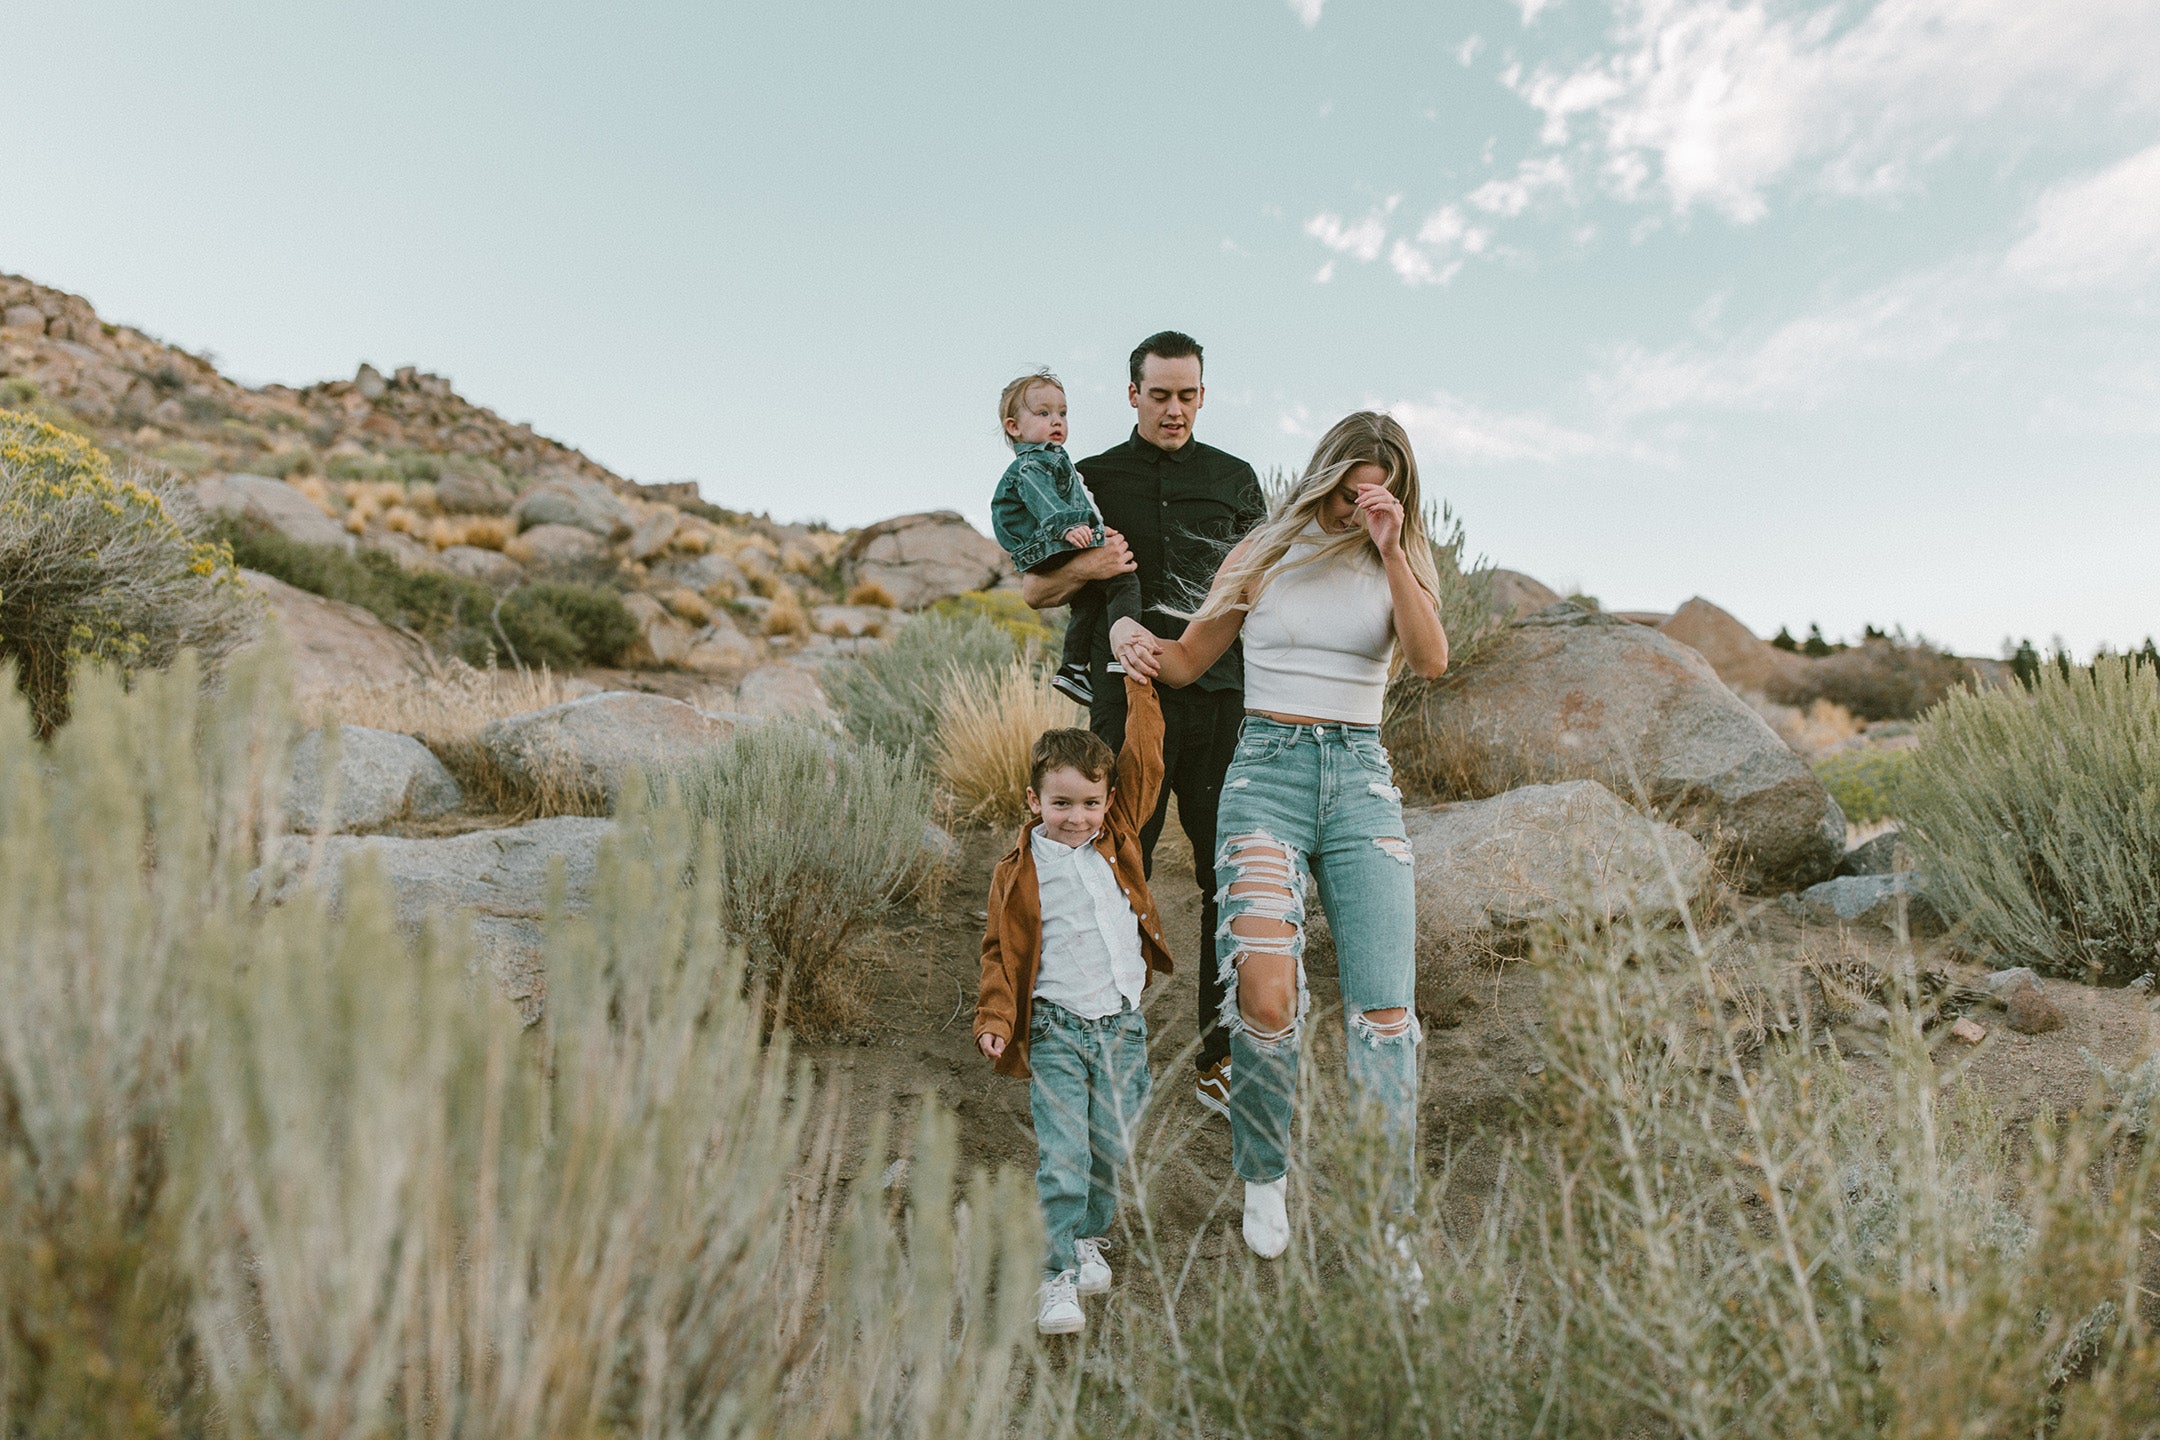 Family photography in Reno, NV